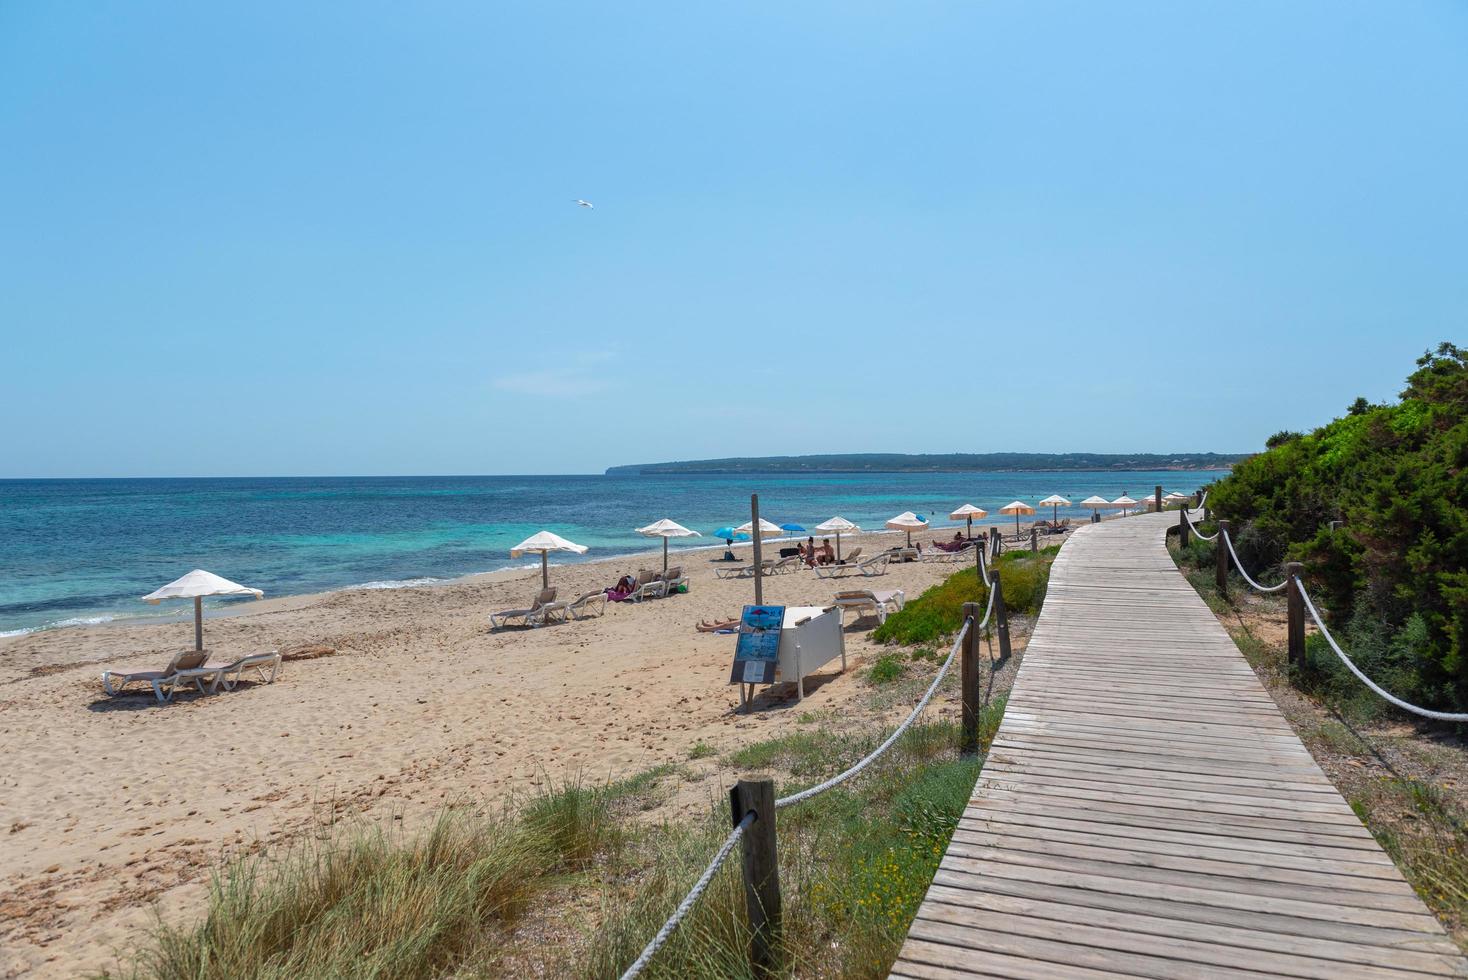 Migjorn beach in Formentera in Spain in Times of Covid 19 photo